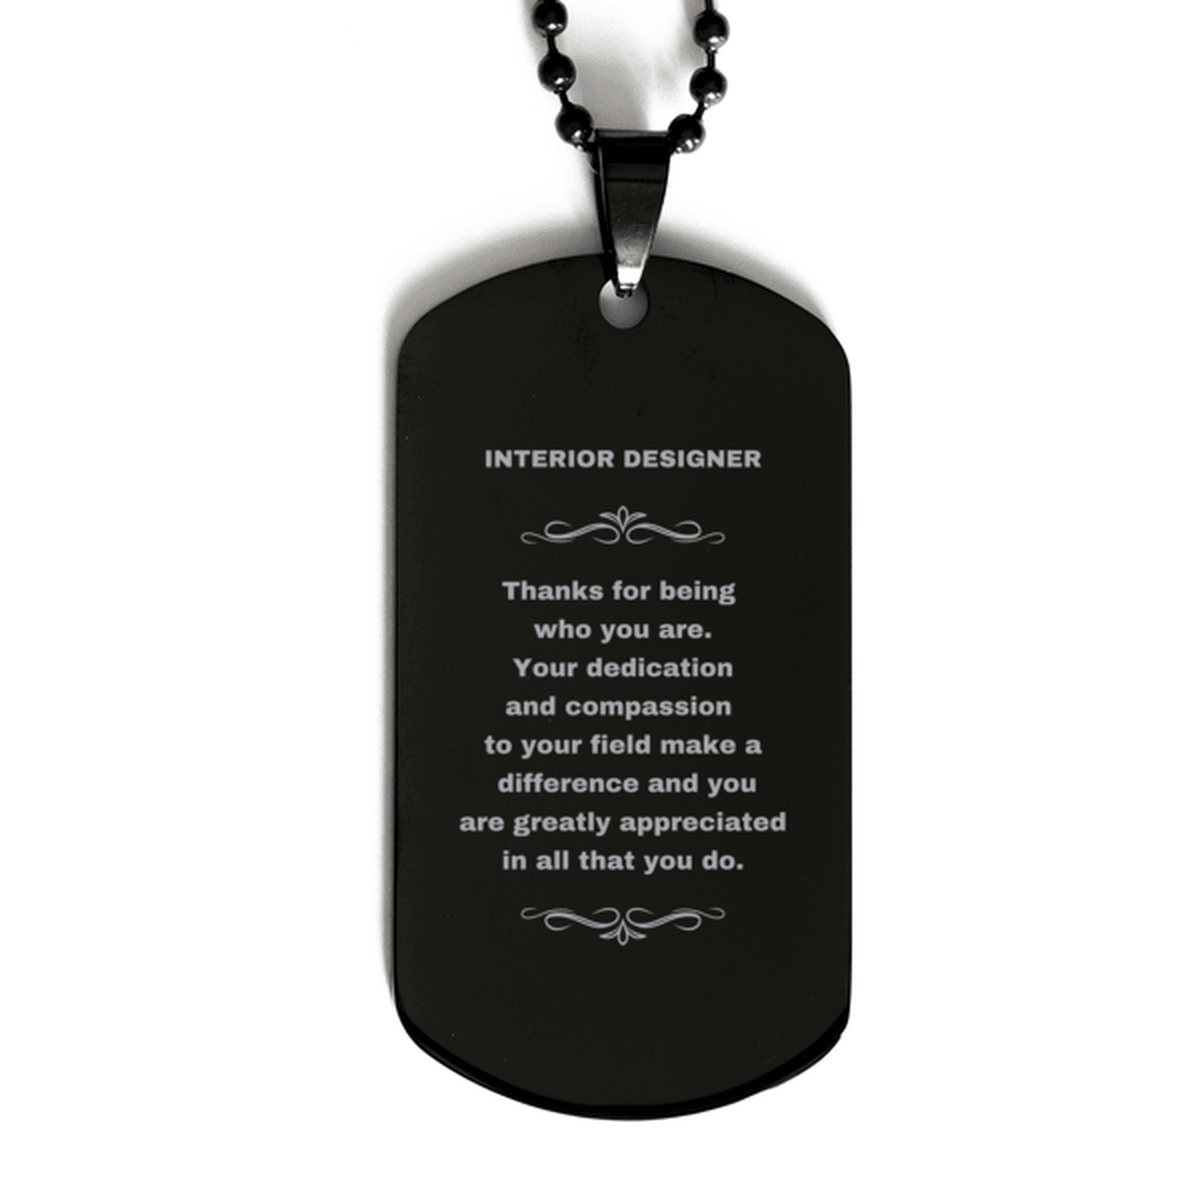 Interior Designer Black Dog Tag Necklace - Thanks for being who you are - Birthday Christmas Jewelry Gifts Coworkers Colleague Boss - Mallard Moon Gift Shop